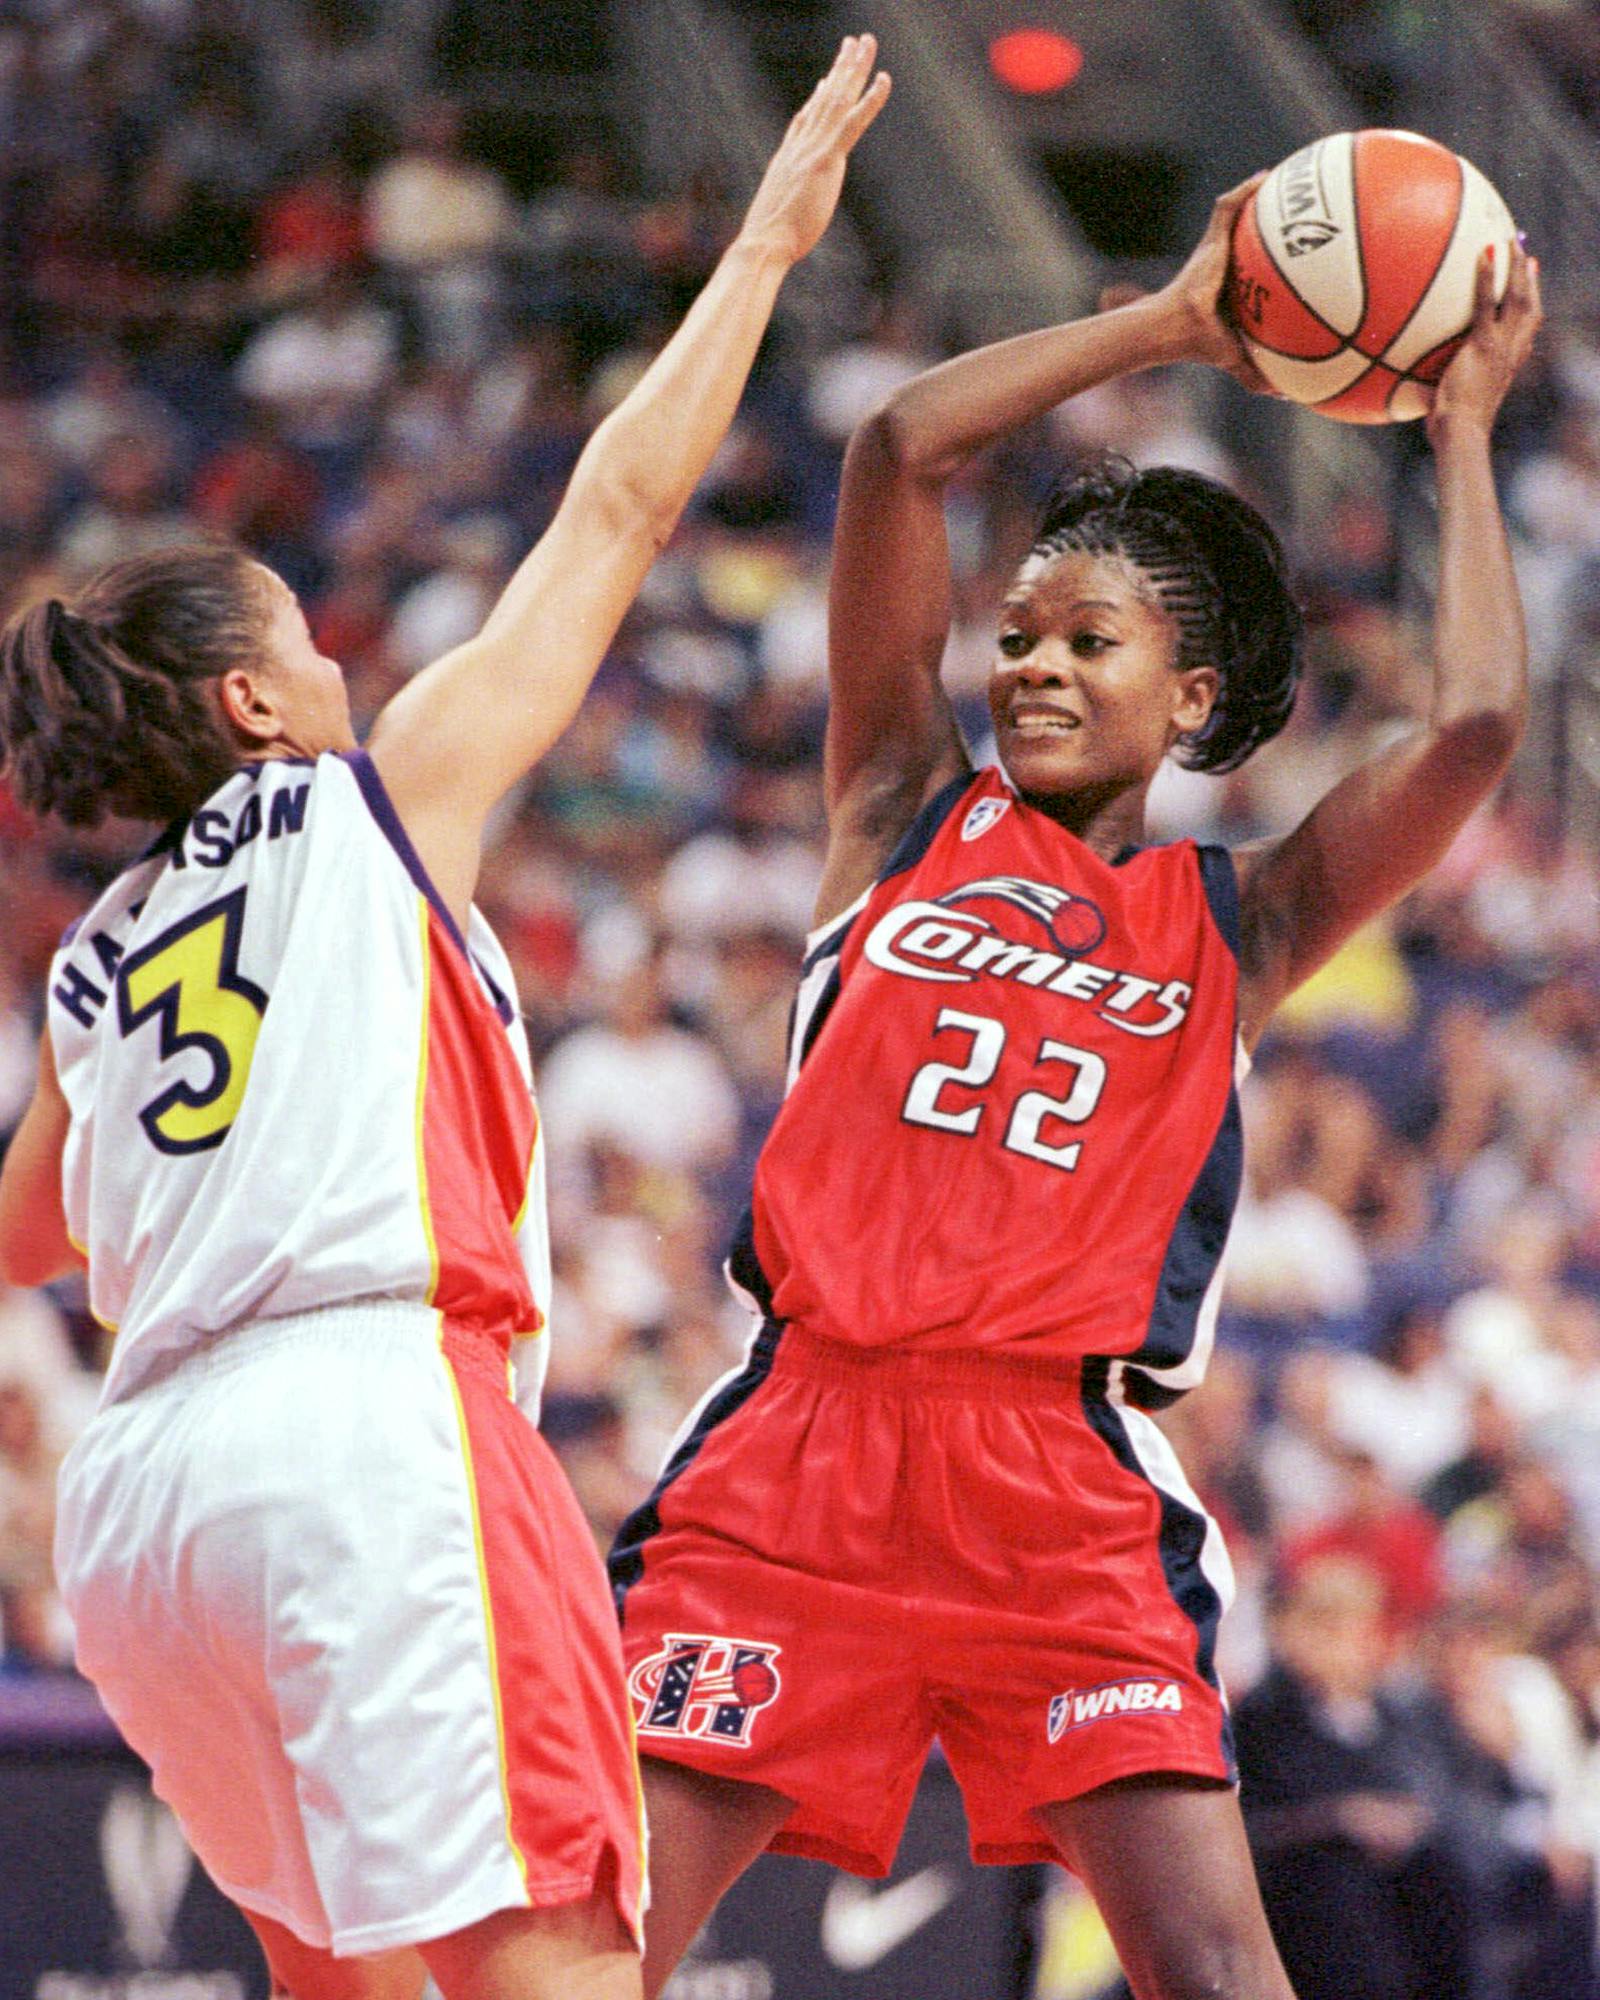 Houston Comets players Michelle Snow, left, and Sheryl Swoopes congratulate  each other after the Comets beat the Minnesota Lynx 77-73 in overtime in  Minneapolis, Friday Aug. 4, 2006. Swoopes led Houston with